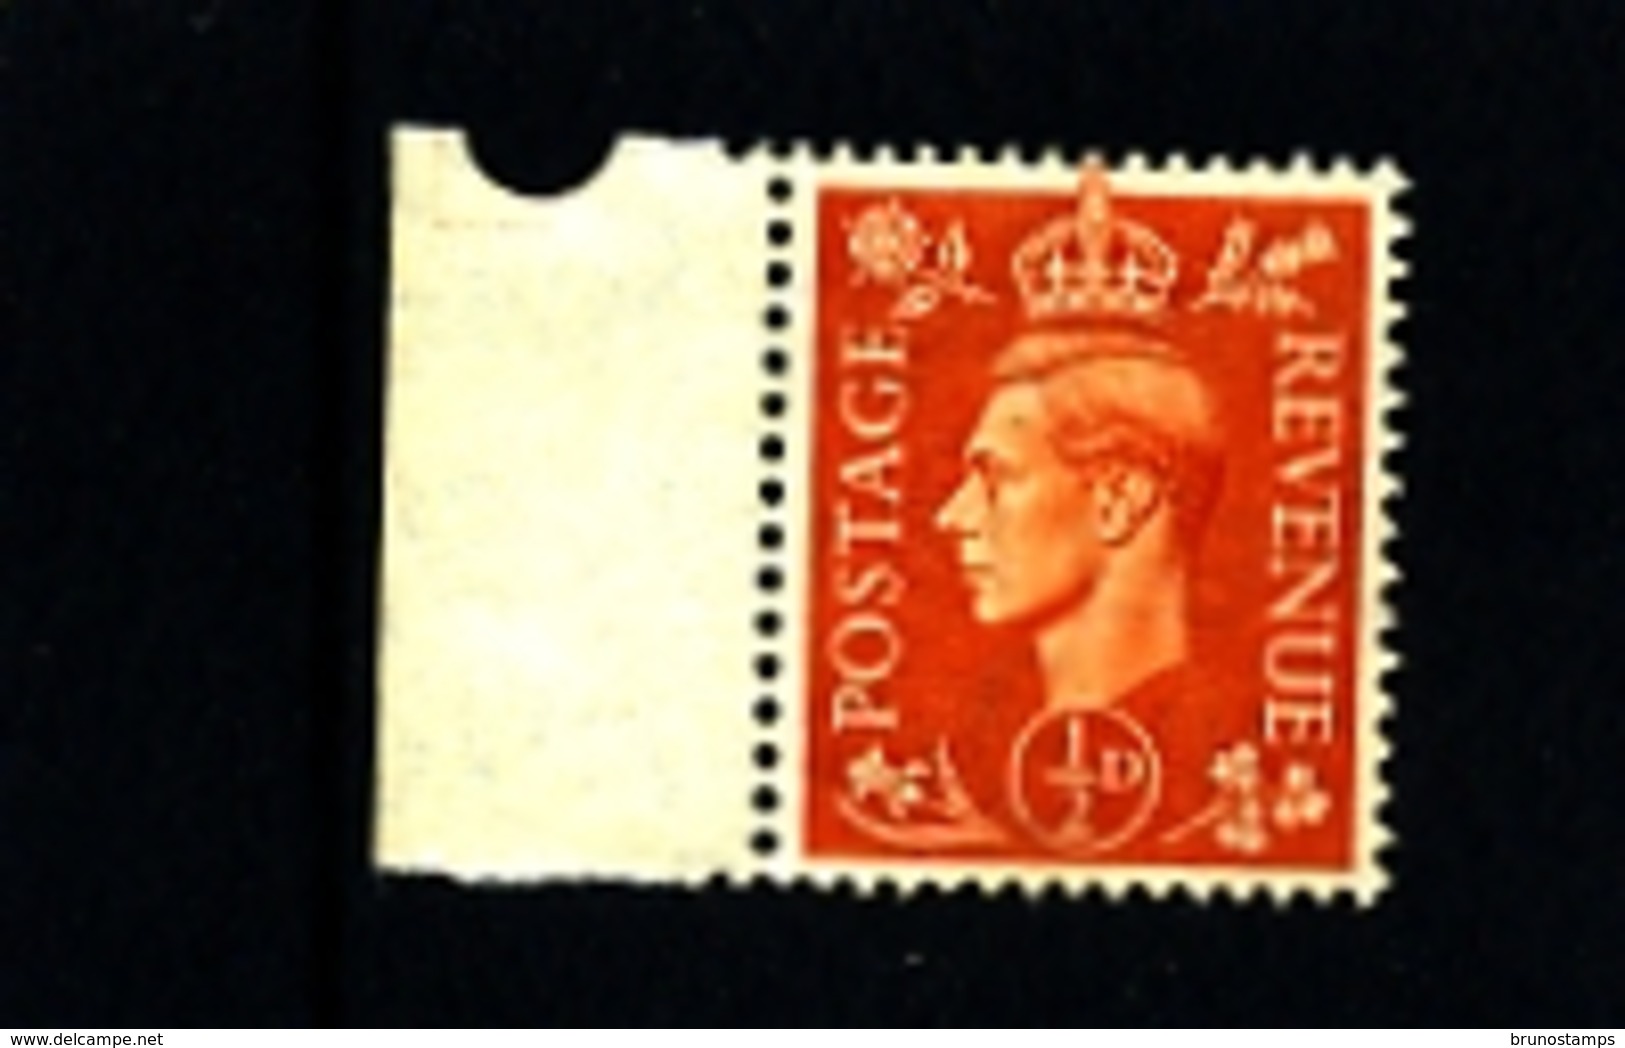 GREAT BRITAIN - 1951  KGVI   1/2d  COLOURS CHANGED  MINT NH - Nuovi